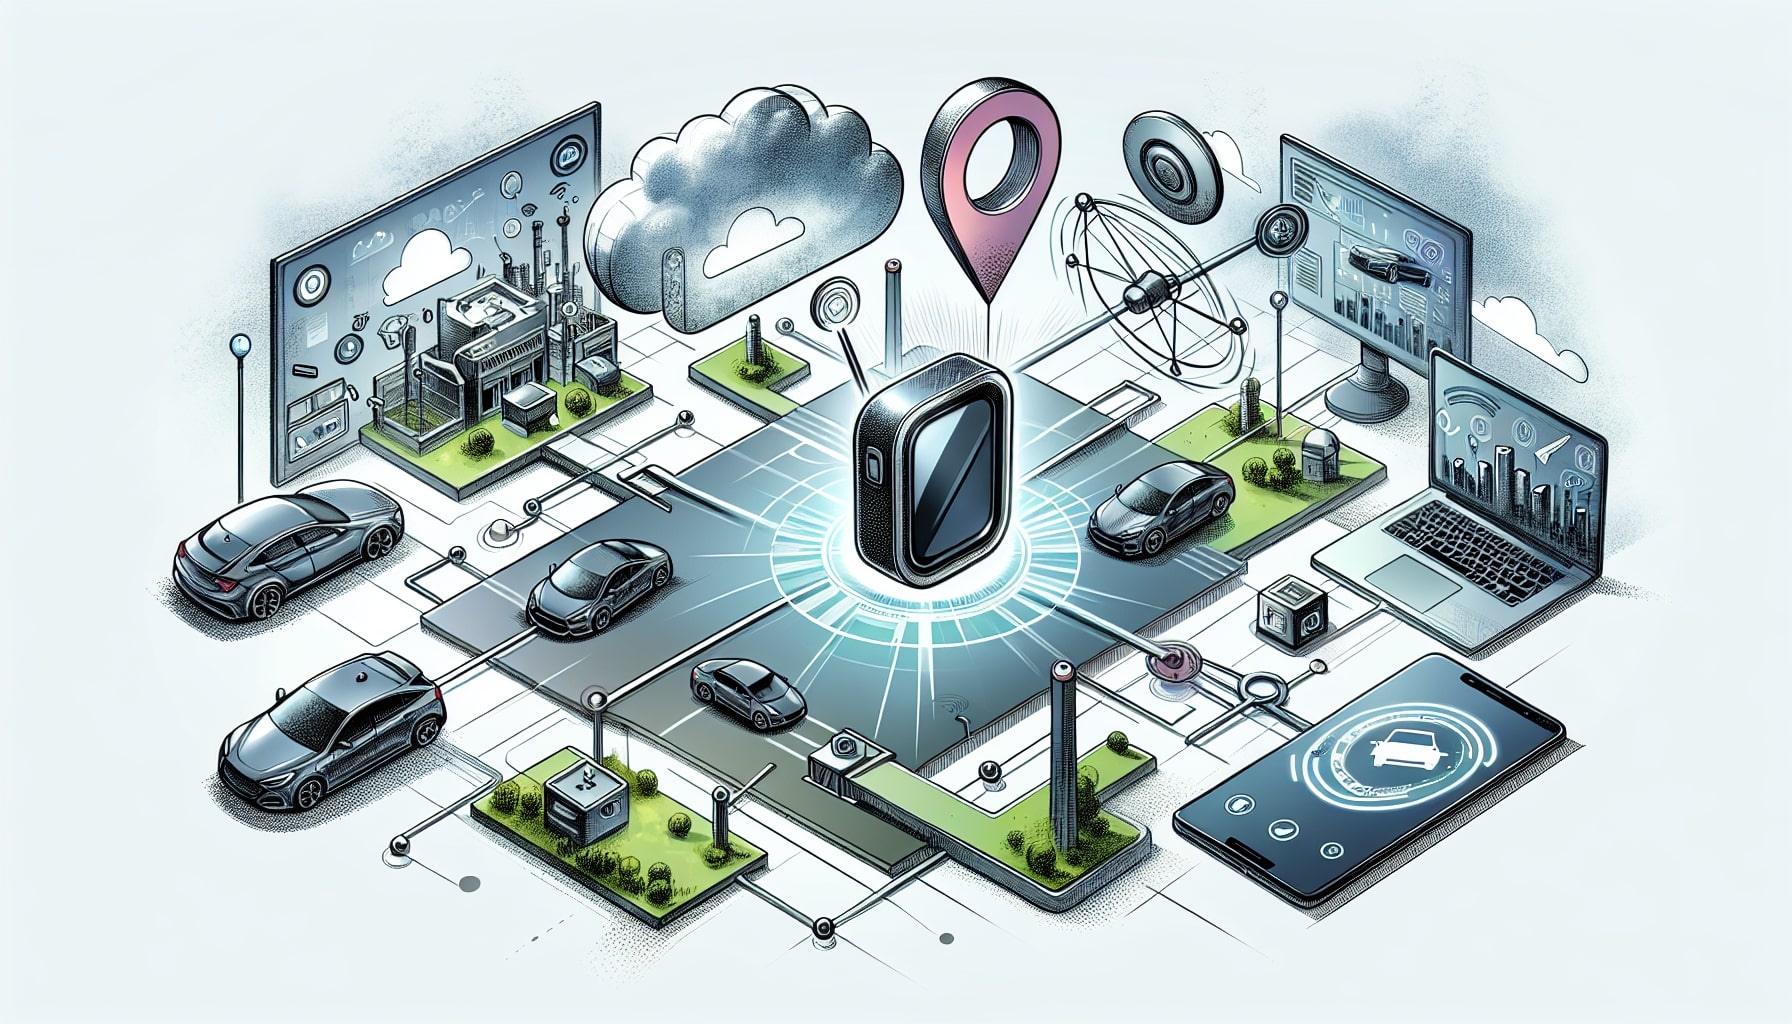 Illustration of smart city and connected technology concept.